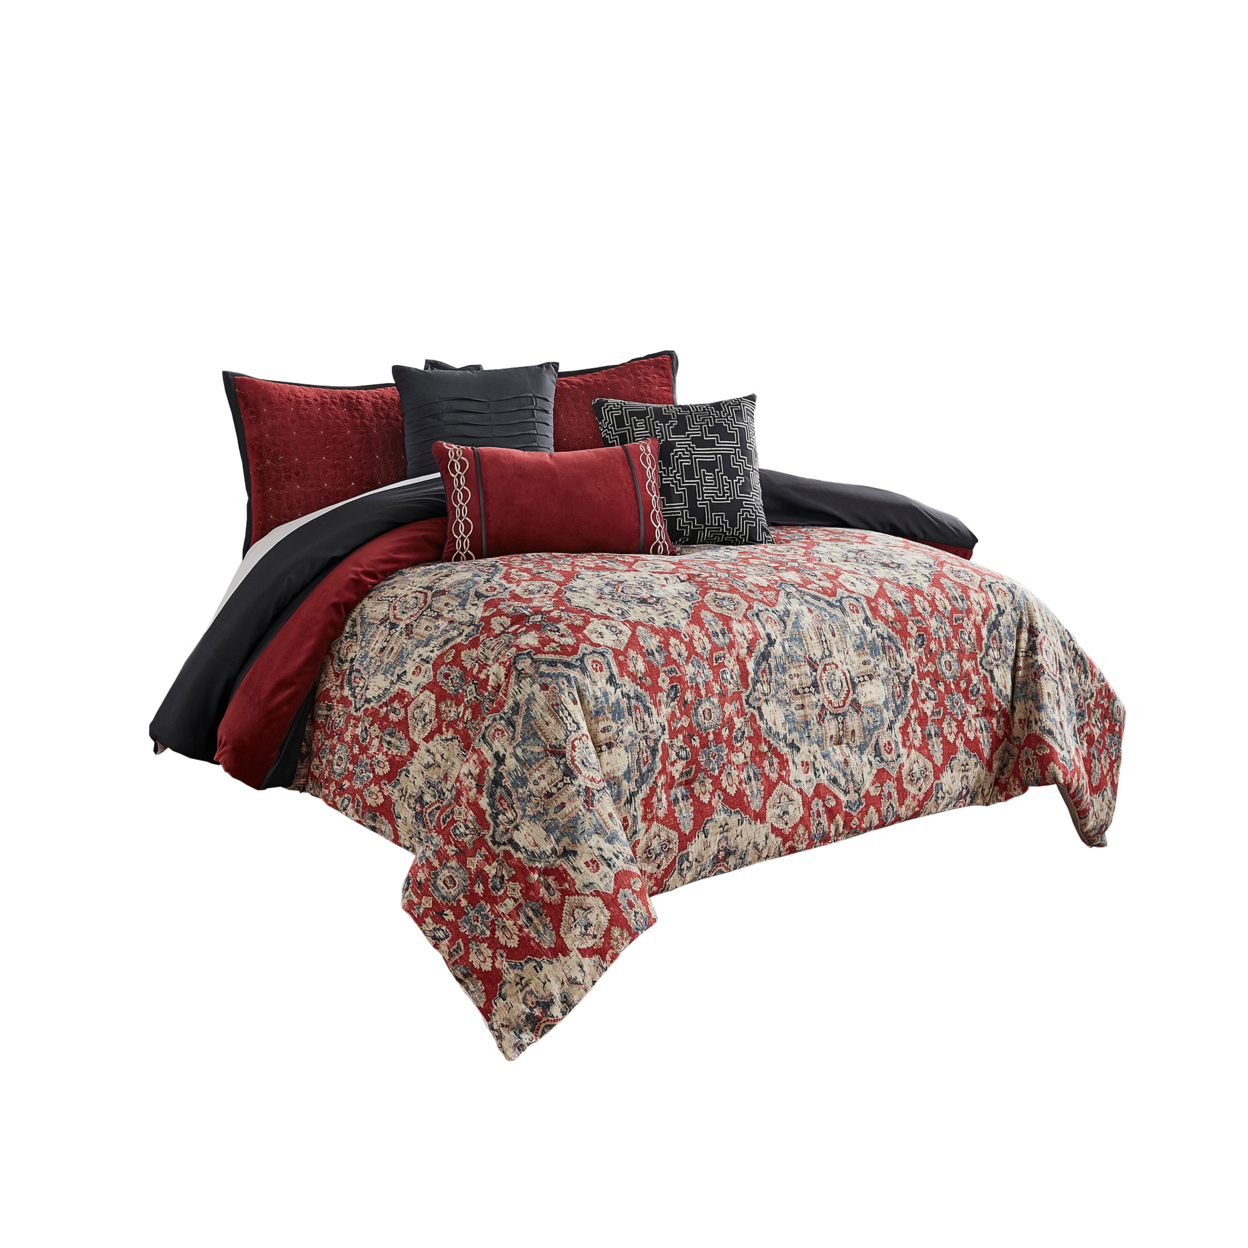 9 Piece Queen Size Comforter Set With Medallion Print, Red And Blue- Saltoro Sherpi